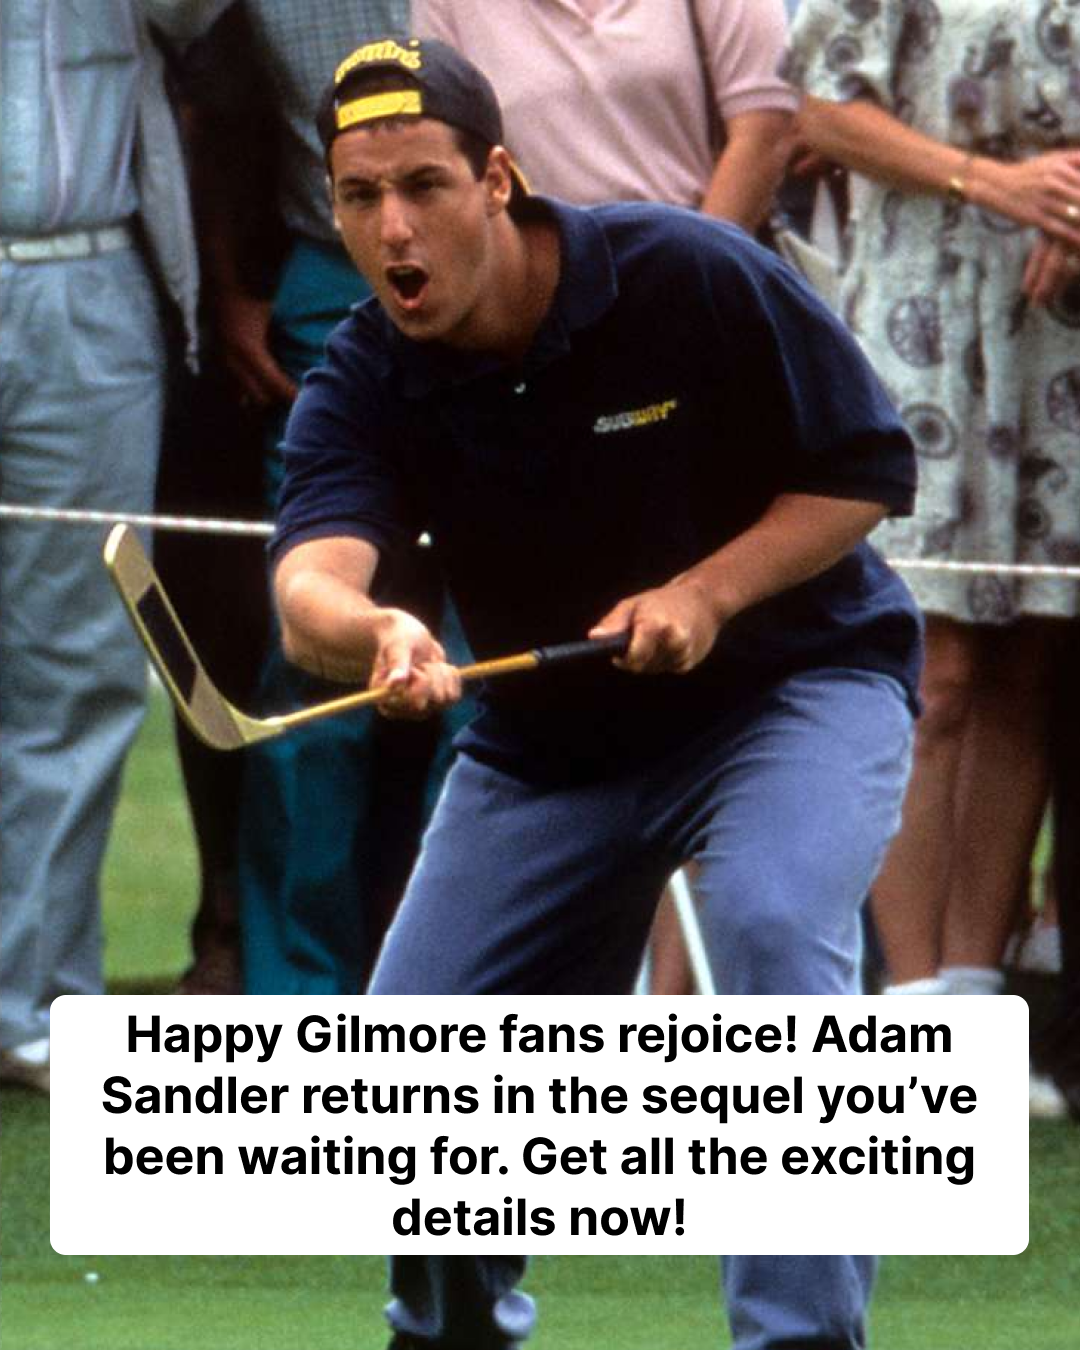 Adam Sandler Officially Returning for More ‘Happy Gilmore’ as Sequel Is Confirmed